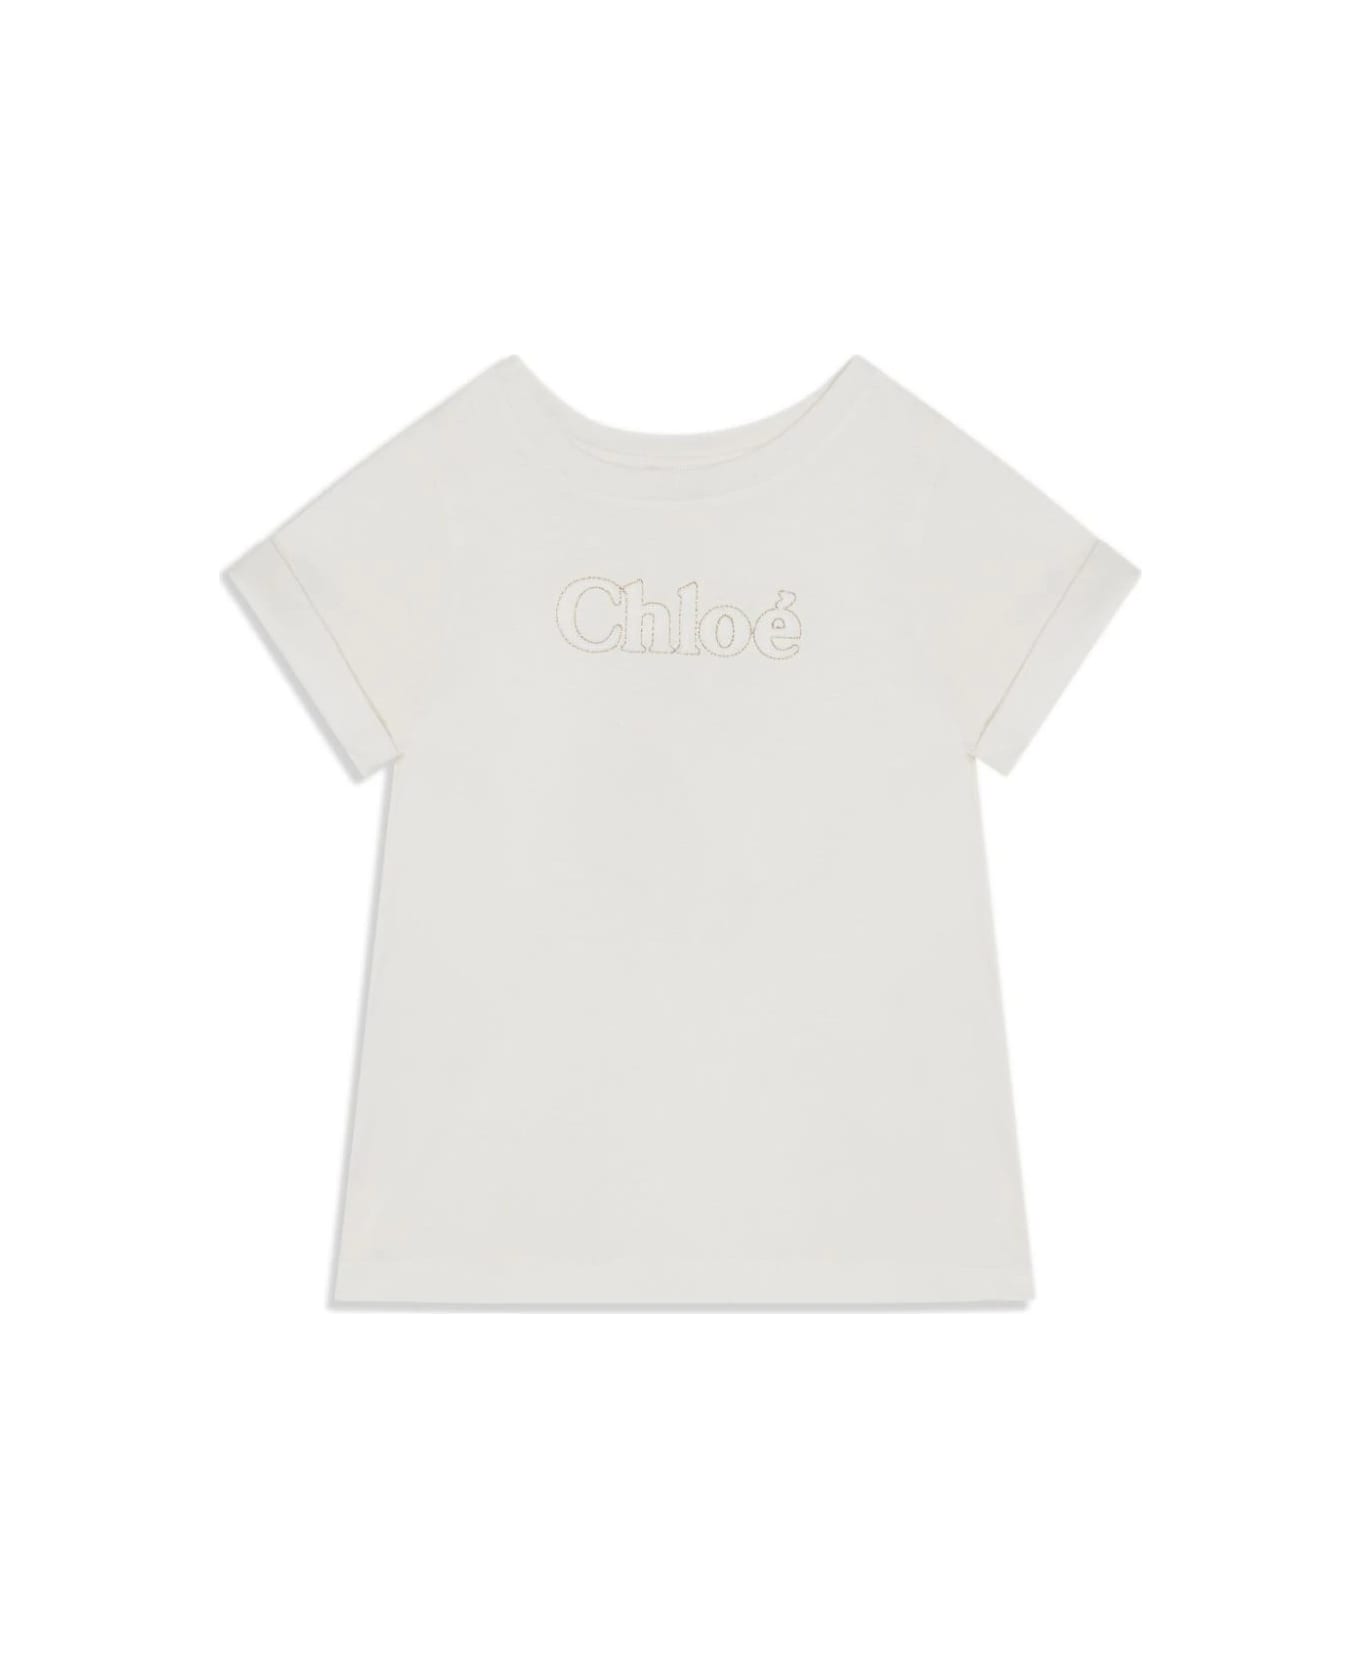 Chloé White T-shirt With Embroidered Logo - White